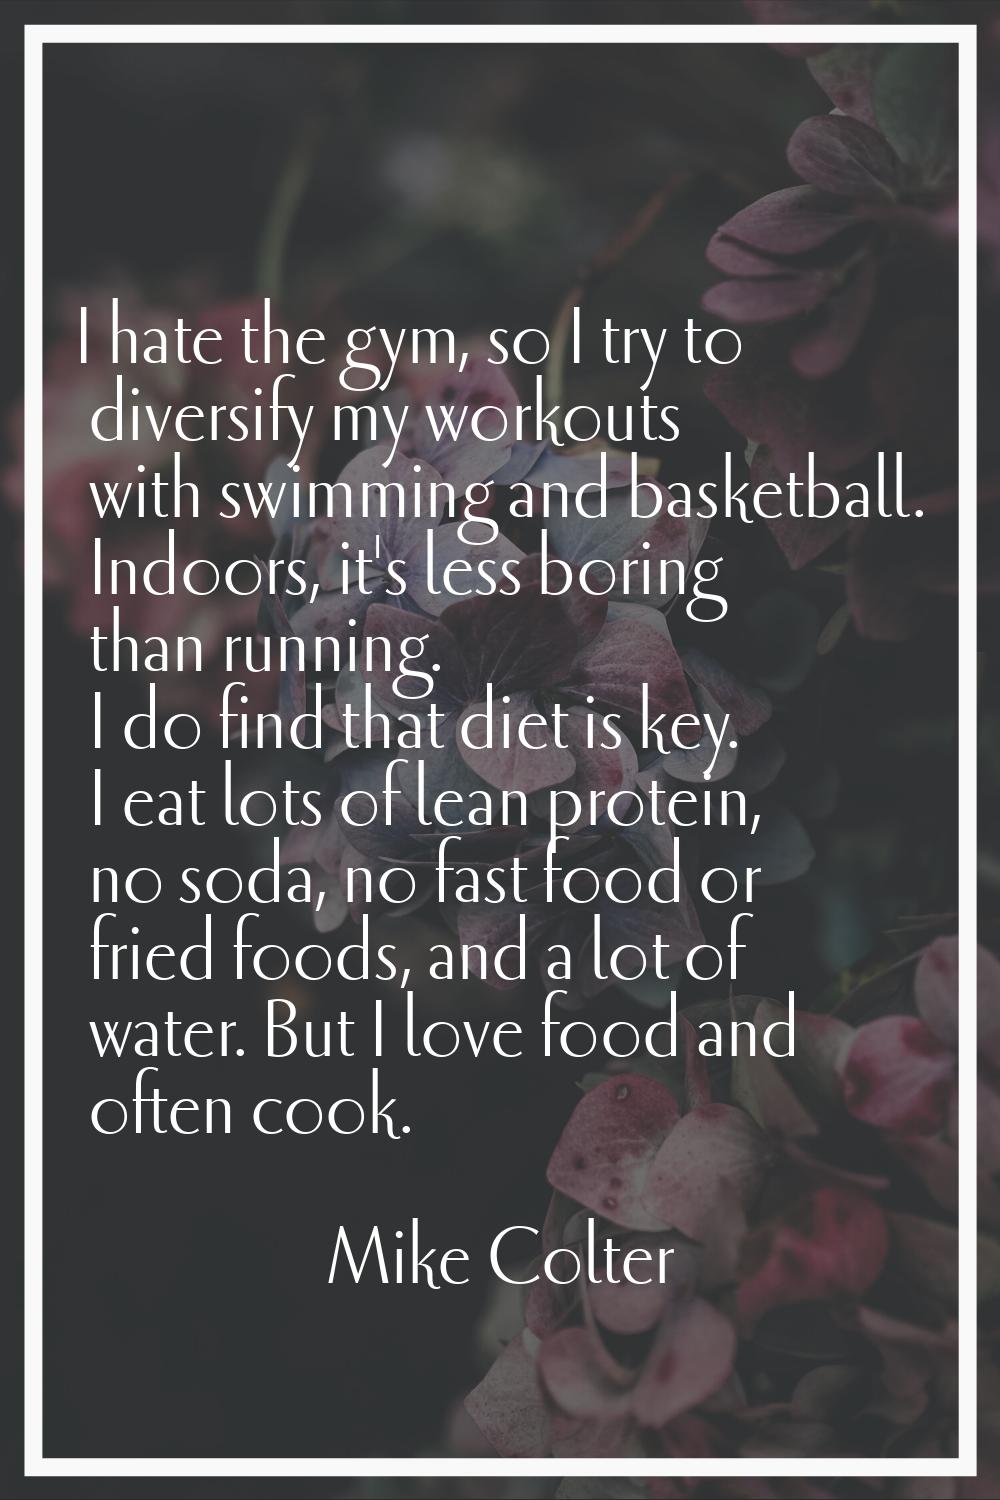 I hate the gym, so I try to diversify my workouts with swimming and basketball. Indoors, it's less 